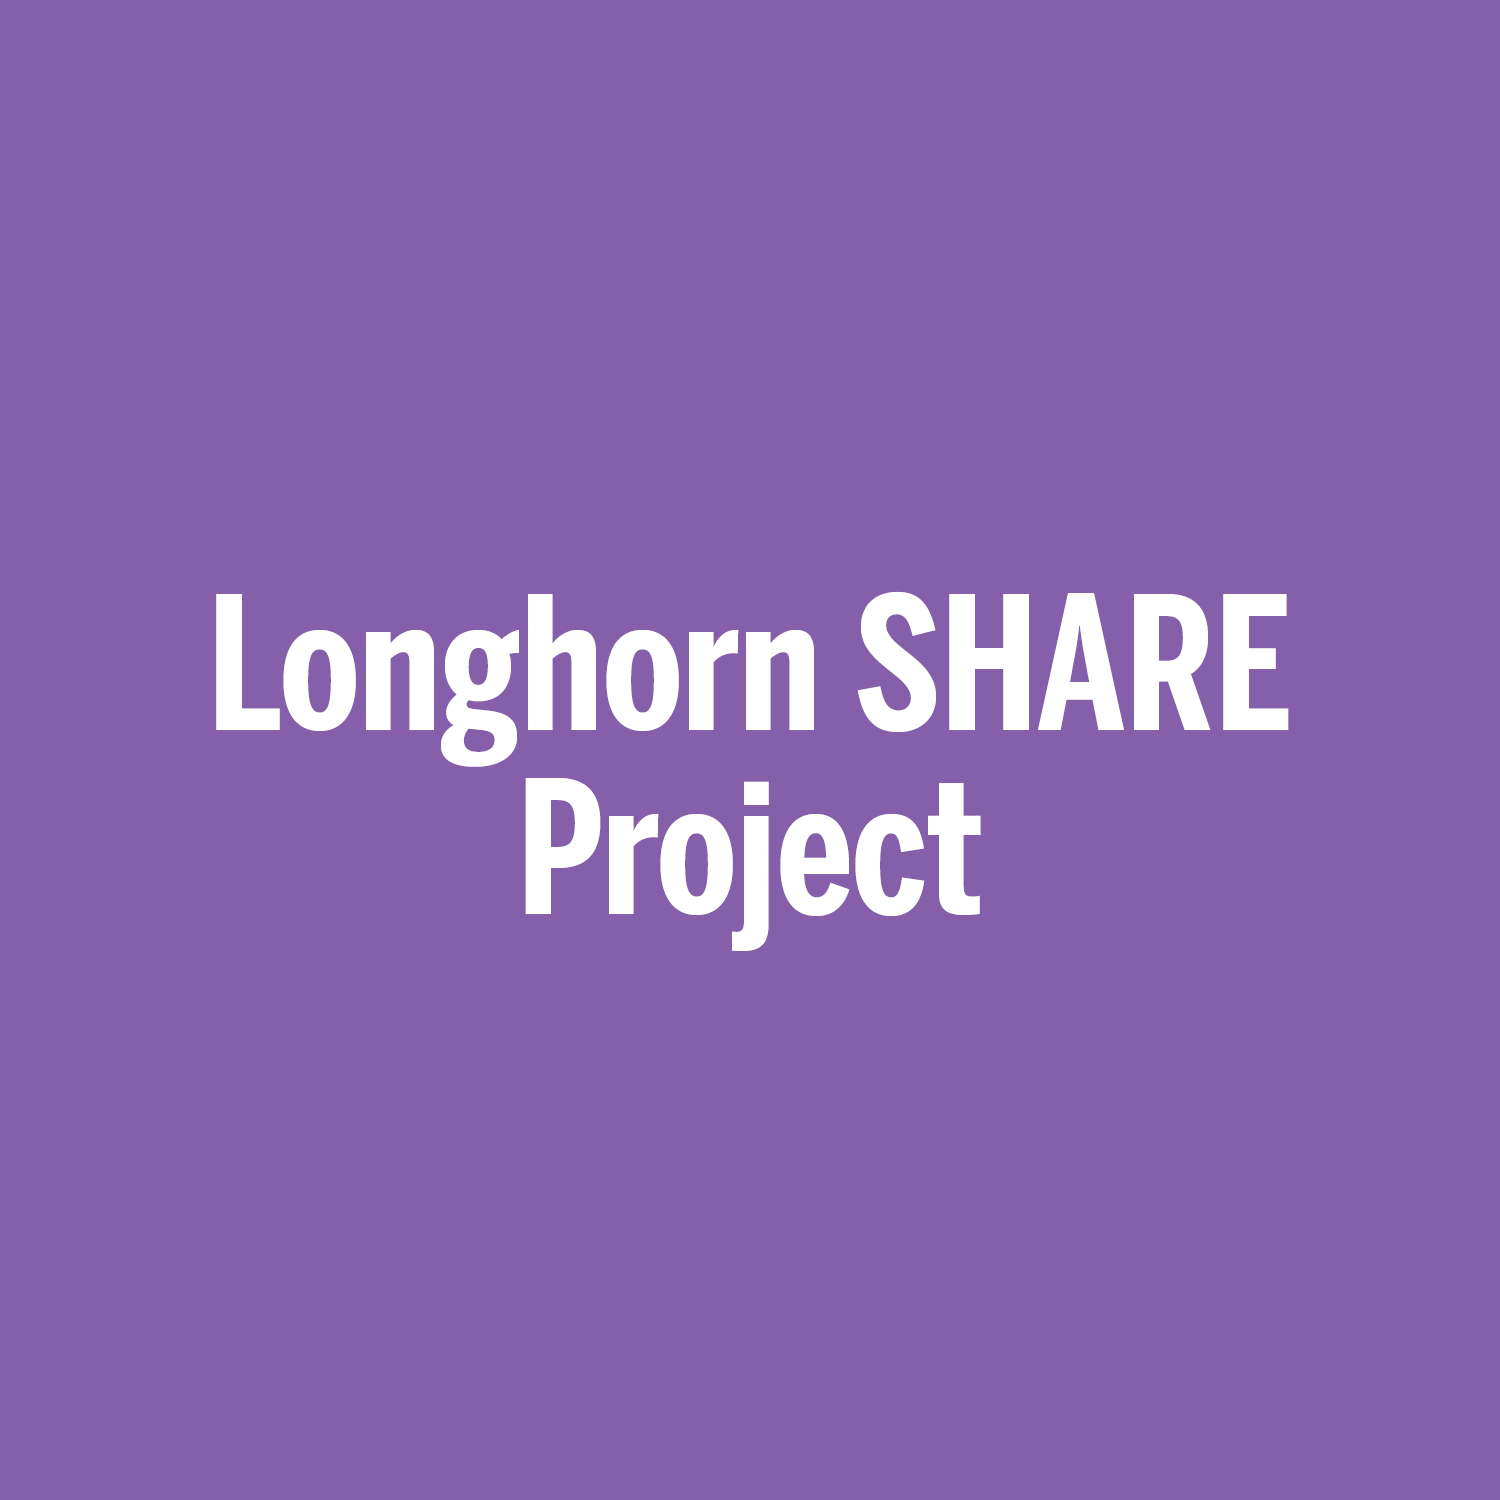 Longhorn SHARE Project